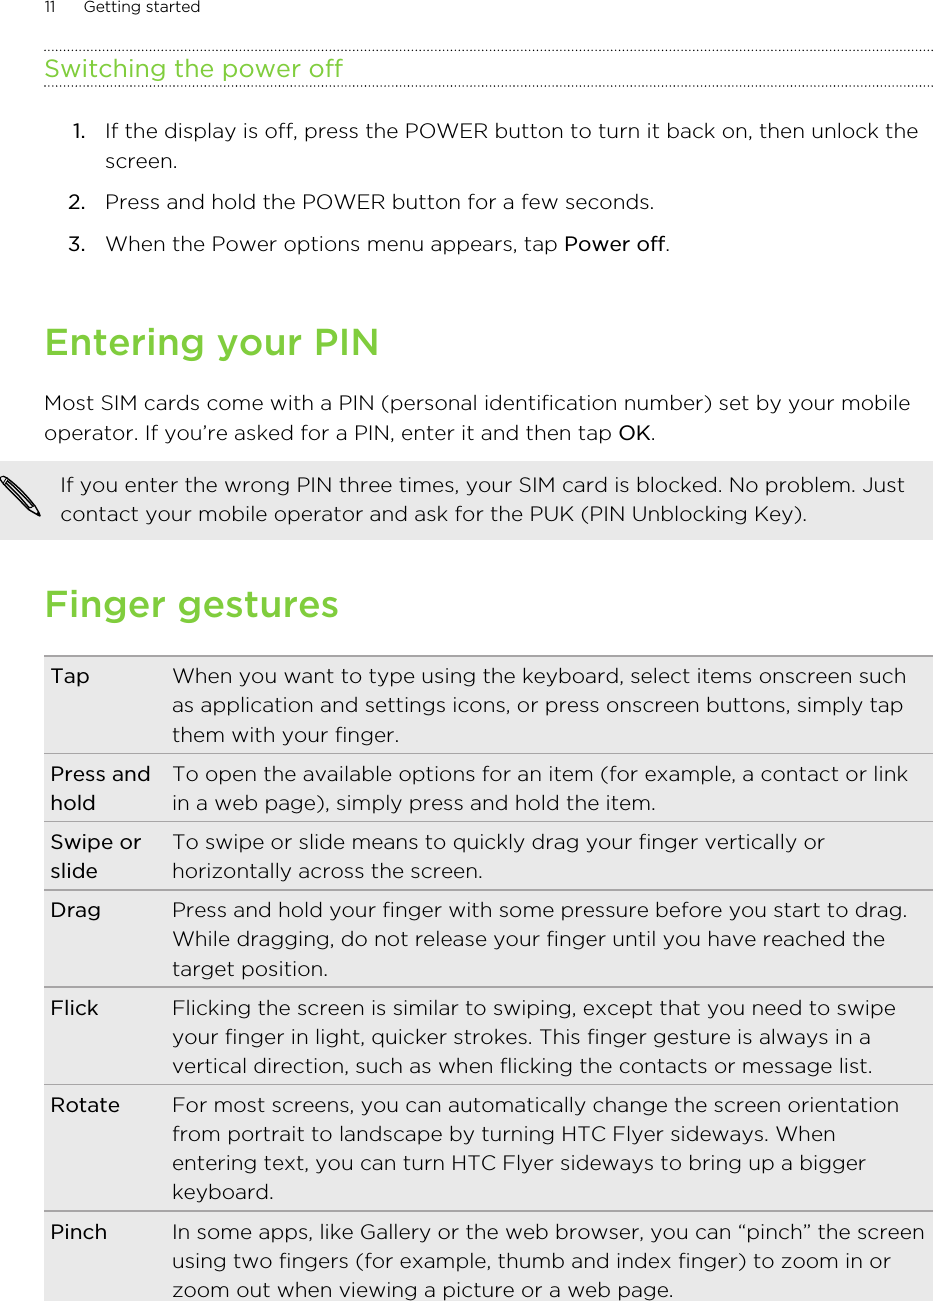 Switching the power off1. If the display is off, press the POWER button to turn it back on, then unlock thescreen.2. Press and hold the POWER button for a few seconds.3. When the Power options menu appears, tap Power off.Entering your PINMost SIM cards come with a PIN (personal identification number) set by your mobileoperator. If you’re asked for a PIN, enter it and then tap OK.If you enter the wrong PIN three times, your SIM card is blocked. No problem. Justcontact your mobile operator and ask for the PUK (PIN Unblocking Key).Finger gesturesTap When you want to type using the keyboard, select items onscreen suchas application and settings icons, or press onscreen buttons, simply tapthem with your finger.Press andholdTo open the available options for an item (for example, a contact or linkin a web page), simply press and hold the item.Swipe orslideTo swipe or slide means to quickly drag your finger vertically orhorizontally across the screen.Drag Press and hold your finger with some pressure before you start to drag.While dragging, do not release your finger until you have reached thetarget position.Flick Flicking the screen is similar to swiping, except that you need to swipeyour finger in light, quicker strokes. This finger gesture is always in avertical direction, such as when flicking the contacts or message list.Rotate For most screens, you can automatically change the screen orientationfrom portrait to landscape by turning HTC Flyer sideways. Whenentering text, you can turn HTC Flyer sideways to bring up a biggerkeyboard.Pinch In some apps, like Gallery or the web browser, you can “pinch” the screenusing two fingers (for example, thumb and index finger) to zoom in orzoom out when viewing a picture or a web page.11 Getting started